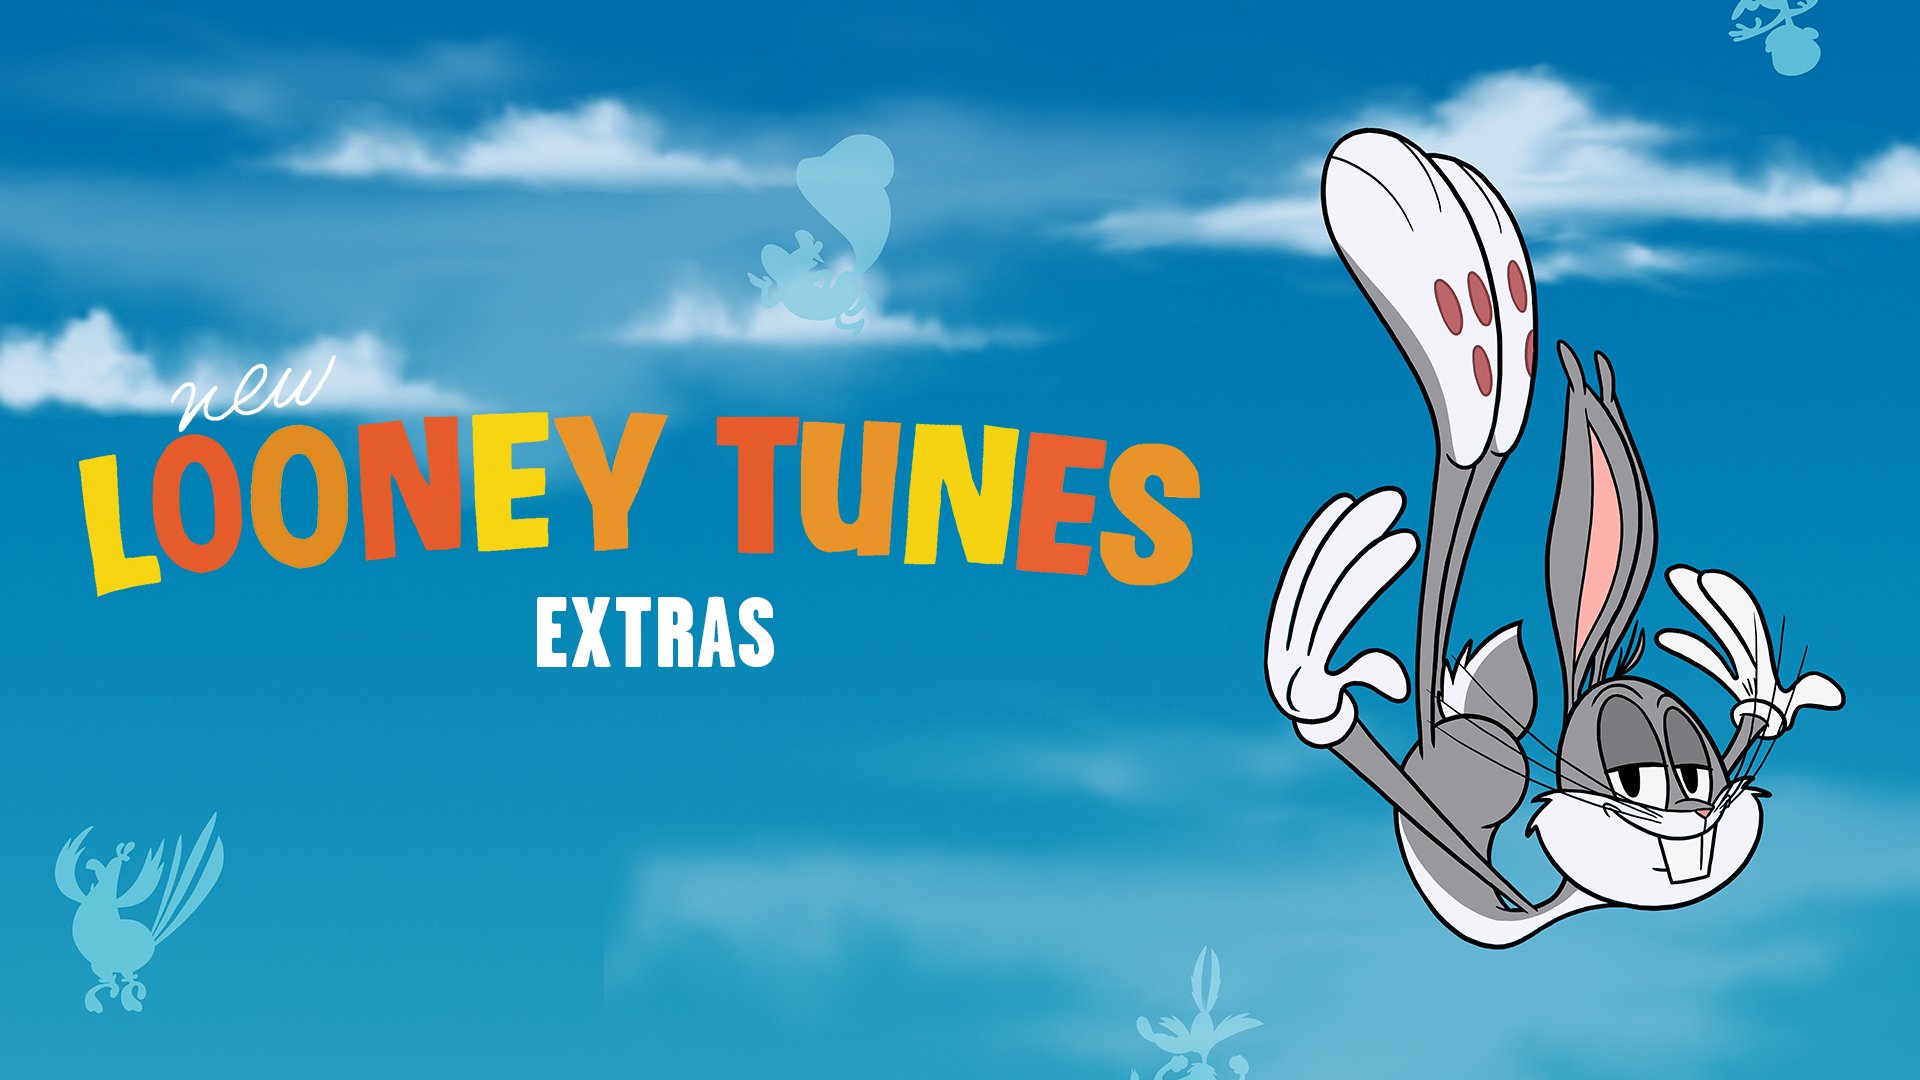 Guante Tectónico Sentido táctil Watch New Looney Tunes: Extras Online - Stream Full Episodes